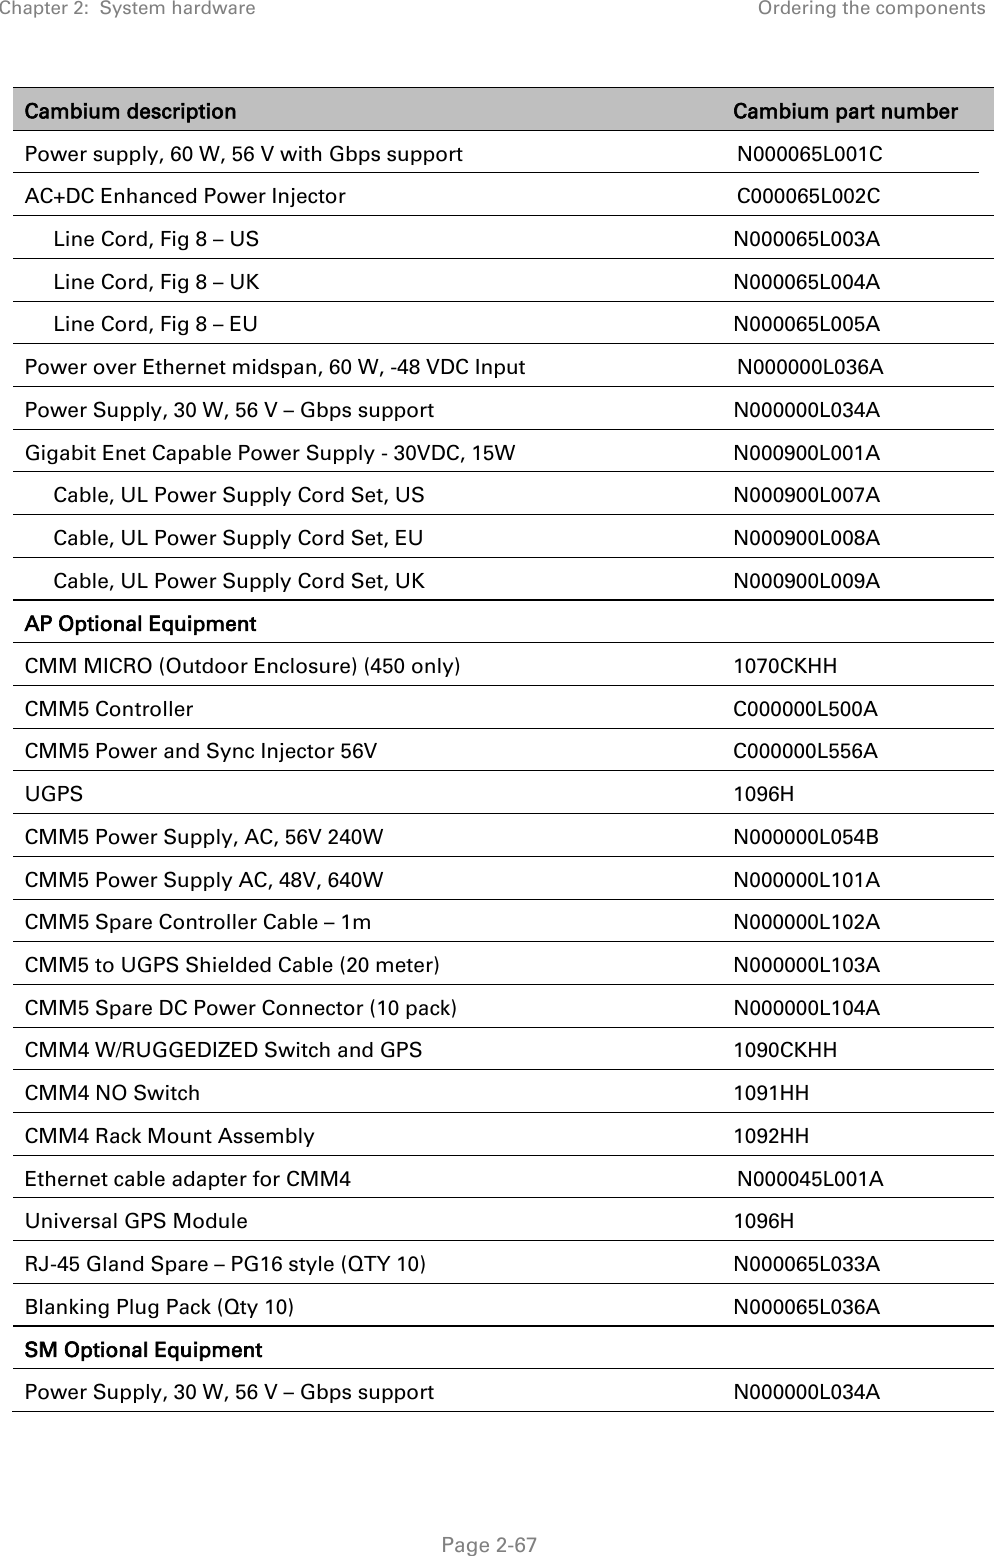 Chapter 2:  System hardware Ordering the components   Page 2-67 Cambium description Cambium part number Power supply, 60 W, 56 V with Gbps support N000065L001C AC+DC Enhanced Power Injector C000065L002C      Line Cord, Fig 8 – US  N000065L003A      Line Cord, Fig 8 – UK  N000065L004A      Line Cord, Fig 8 – EU  N000065L005A Power over Ethernet midspan, 60 W, -48 VDC Input N000000L036A Power Supply, 30 W, 56 V – Gbps support N000000L034A Gigabit Enet Capable Power Supply - 30VDC, 15W N000900L001A      Cable, UL Power Supply Cord Set, US N000900L007A      Cable, UL Power Supply Cord Set, EU N000900L008A      Cable, UL Power Supply Cord Set, UK N000900L009A AP Optional Equipment  CMM MICRO (Outdoor Enclosure) (450 only) 1070CKHH CMM5 Controller C000000L500A CMM5 Power and Sync Injector 56V C000000L556A UGPS  1096H CMM5 Power Supply, AC, 56V 240W N000000L054B CMM5 Power Supply AC, 48V, 640W N000000L101A CMM5 Spare Controller Cable – 1m N000000L102A CMM5 to UGPS Shielded Cable (20 meter) N000000L103A CMM5 Spare DC Power Connector (10 pack) N000000L104A CMM4 W/RUGGEDIZED Switch and GPS 1090CKHH CMM4 NO Switch 1091HH CMM4 Rack Mount Assembly 1092HH Ethernet cable adapter for CMM4 N000045L001A Universal GPS Module 1096H RJ-45 Gland Spare – PG16 style (QTY 10) N000065L033A Blanking Plug Pack (Qty 10) N000065L036A SM Optional Equipment  Power Supply, 30 W, 56 V – Gbps support N000000L034A 